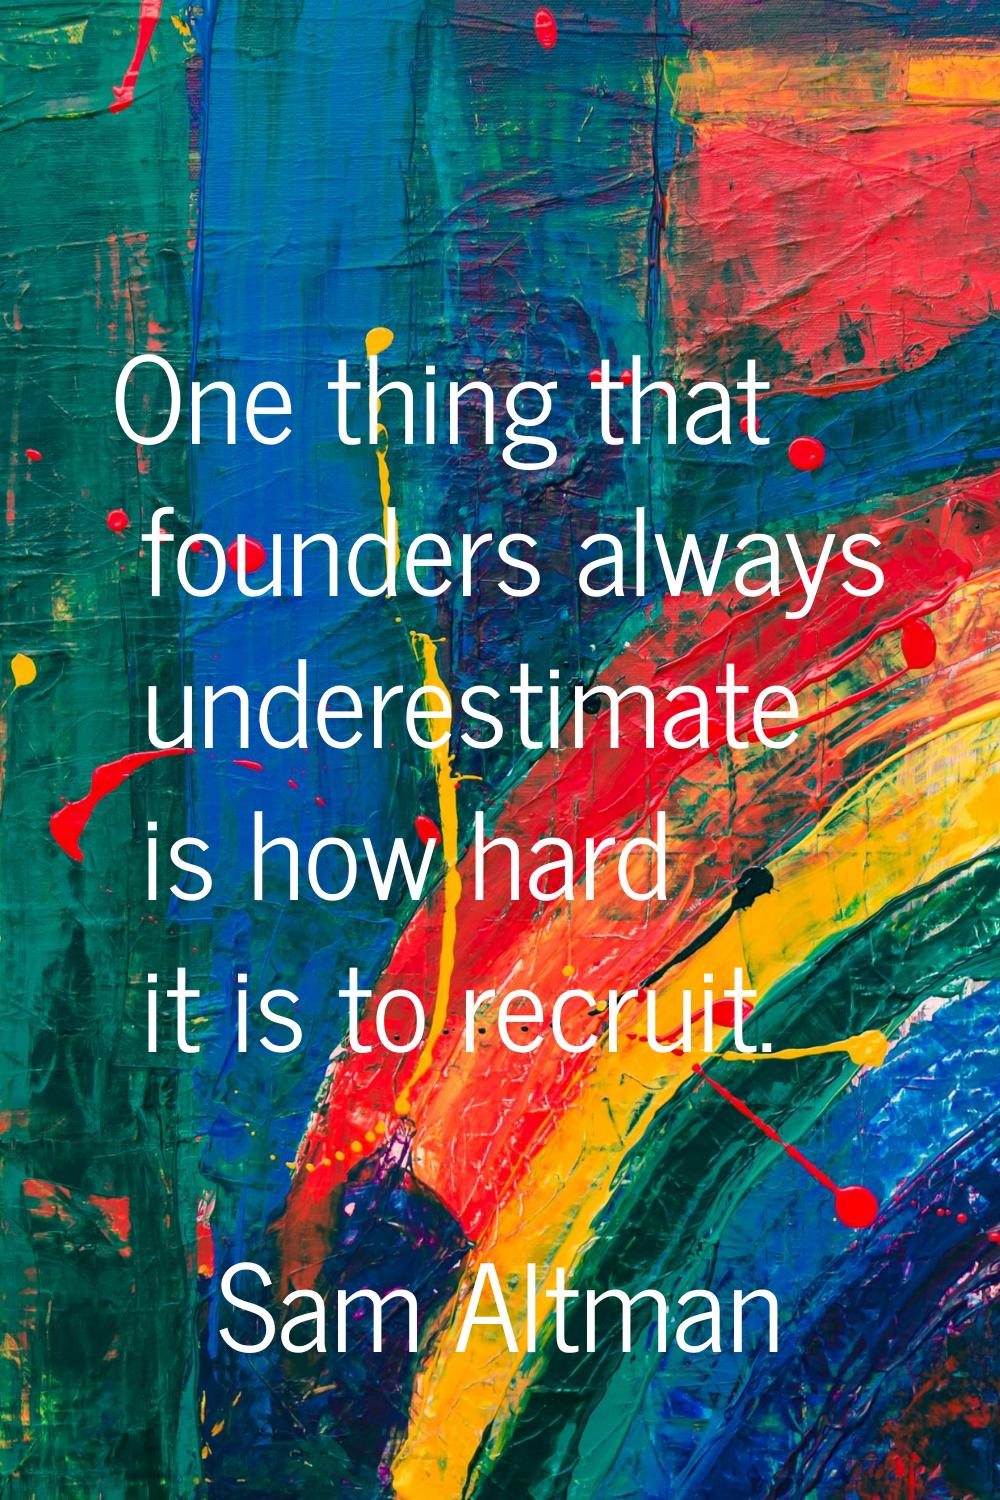 One thing that founders always underestimate is how hard it is to recruit.